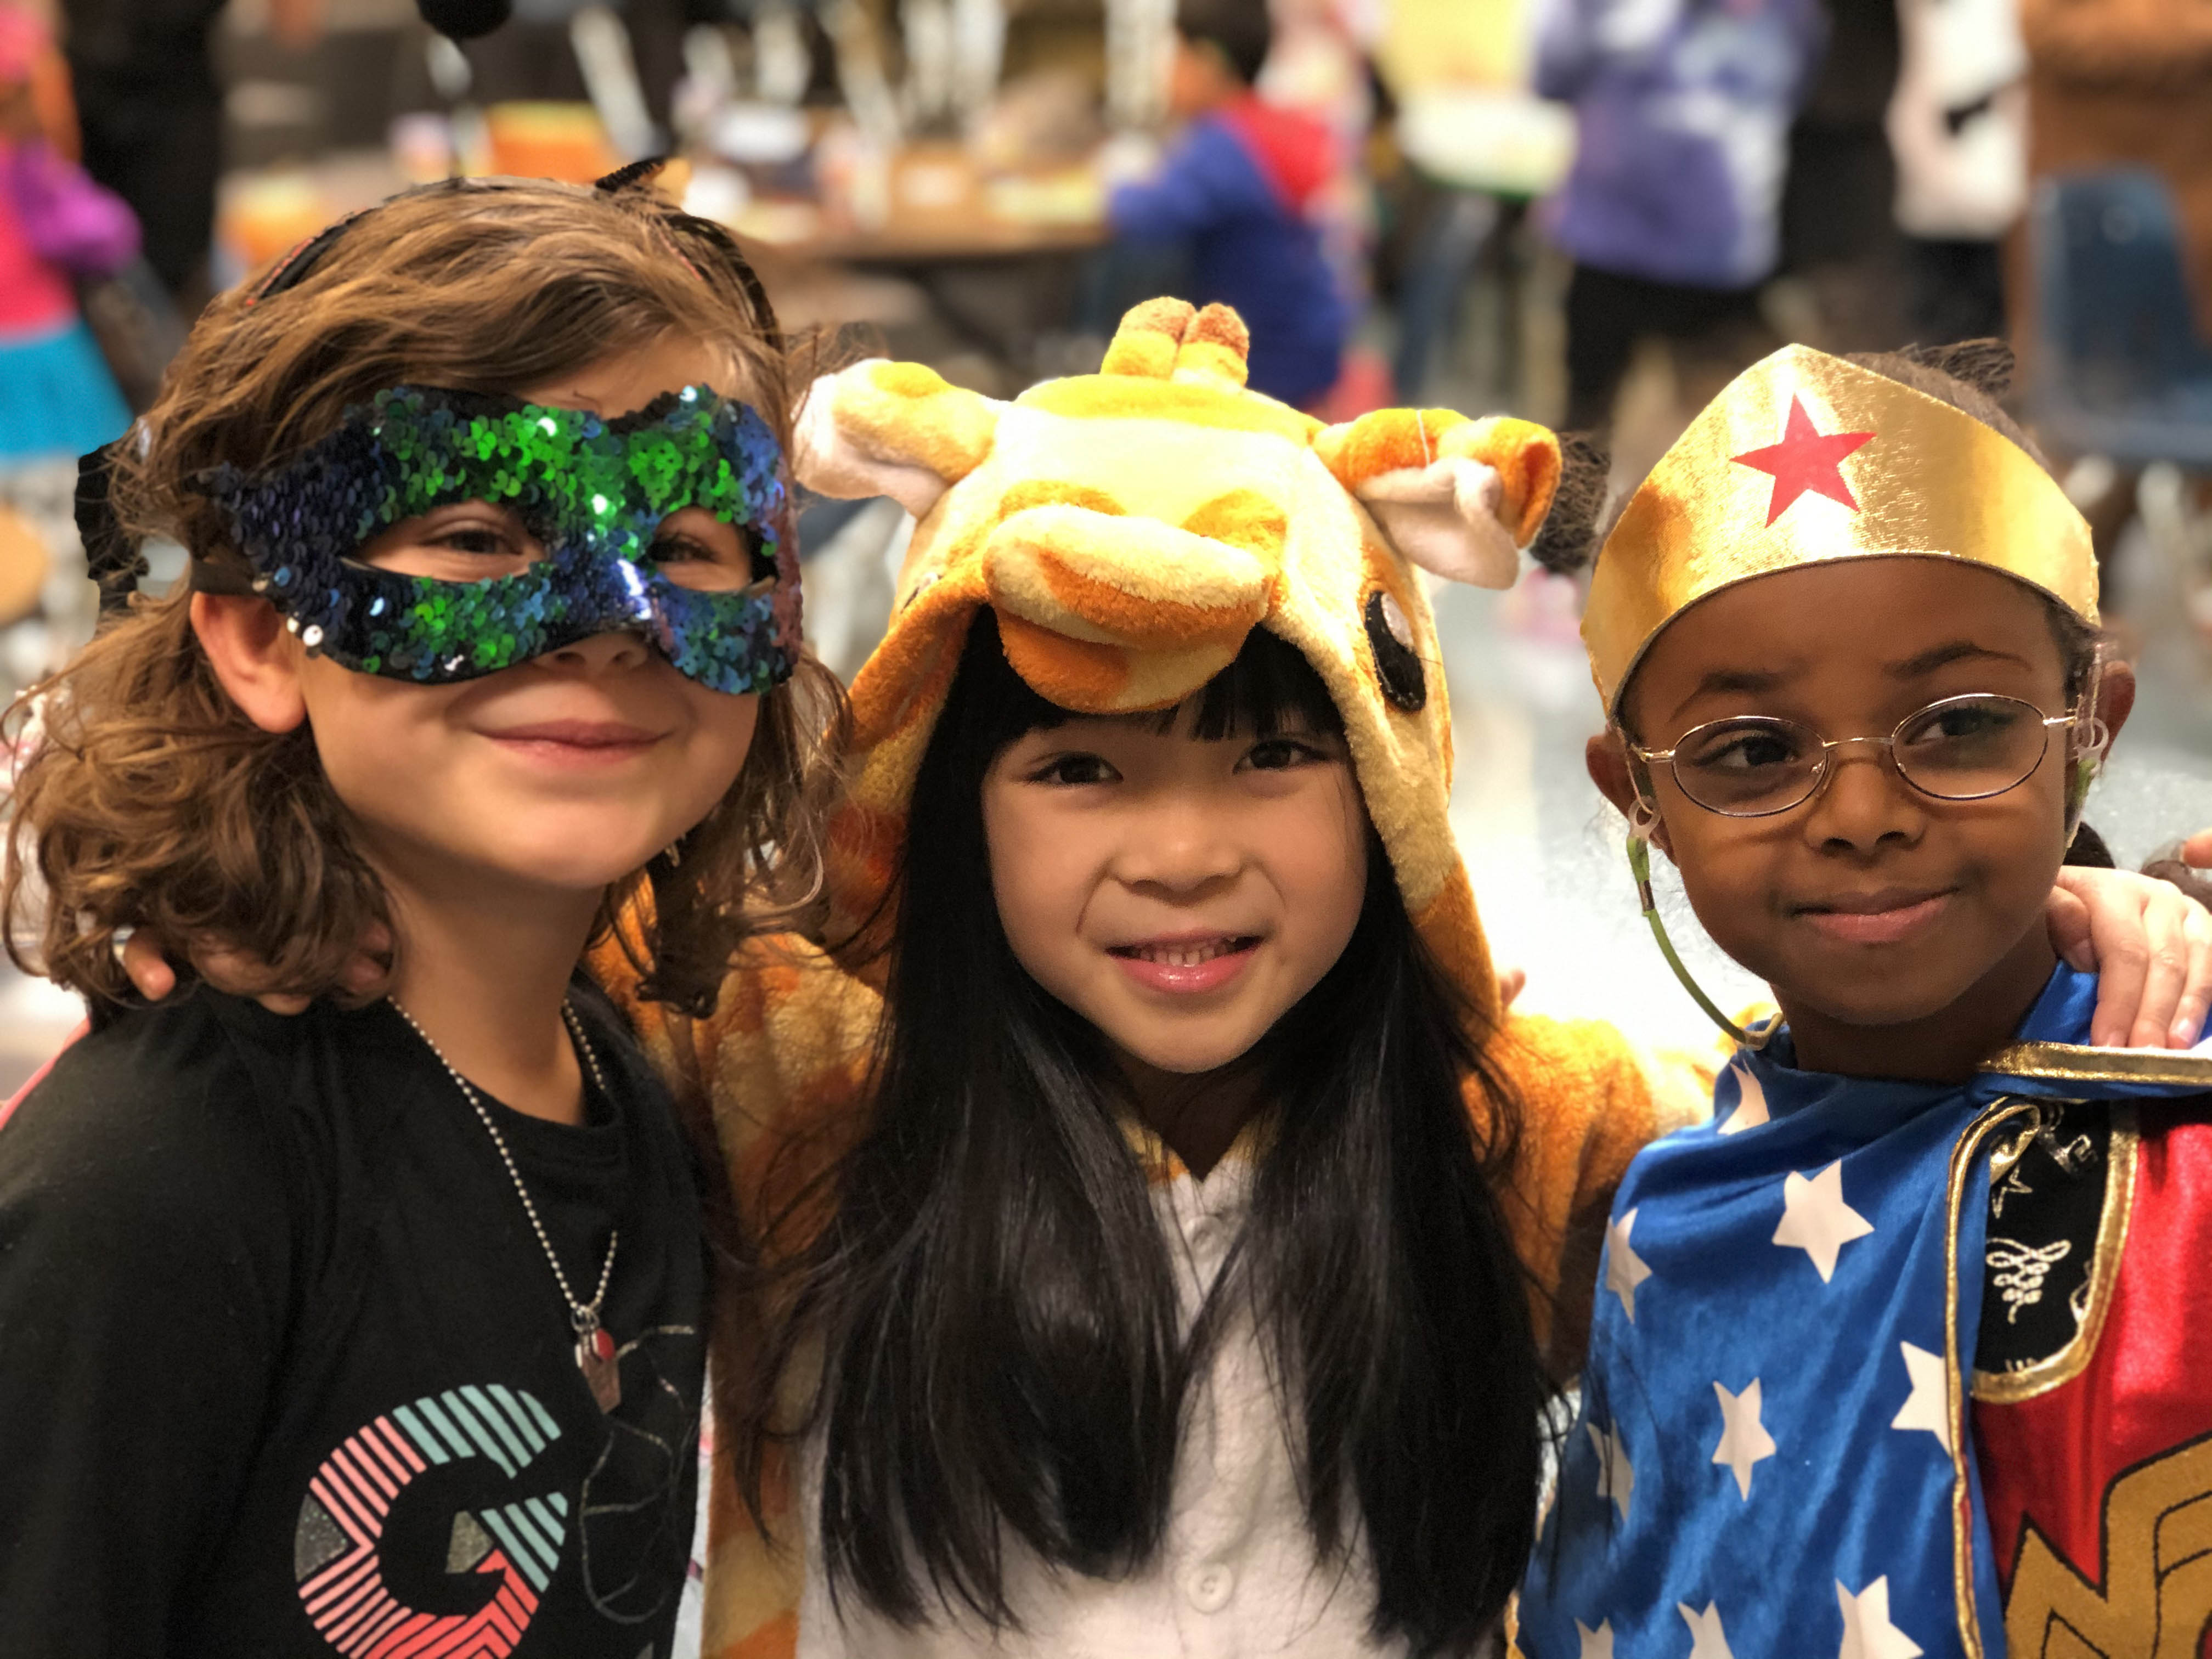 three students in their halloween costumes - sequoin mask, giraffe and wonder woman